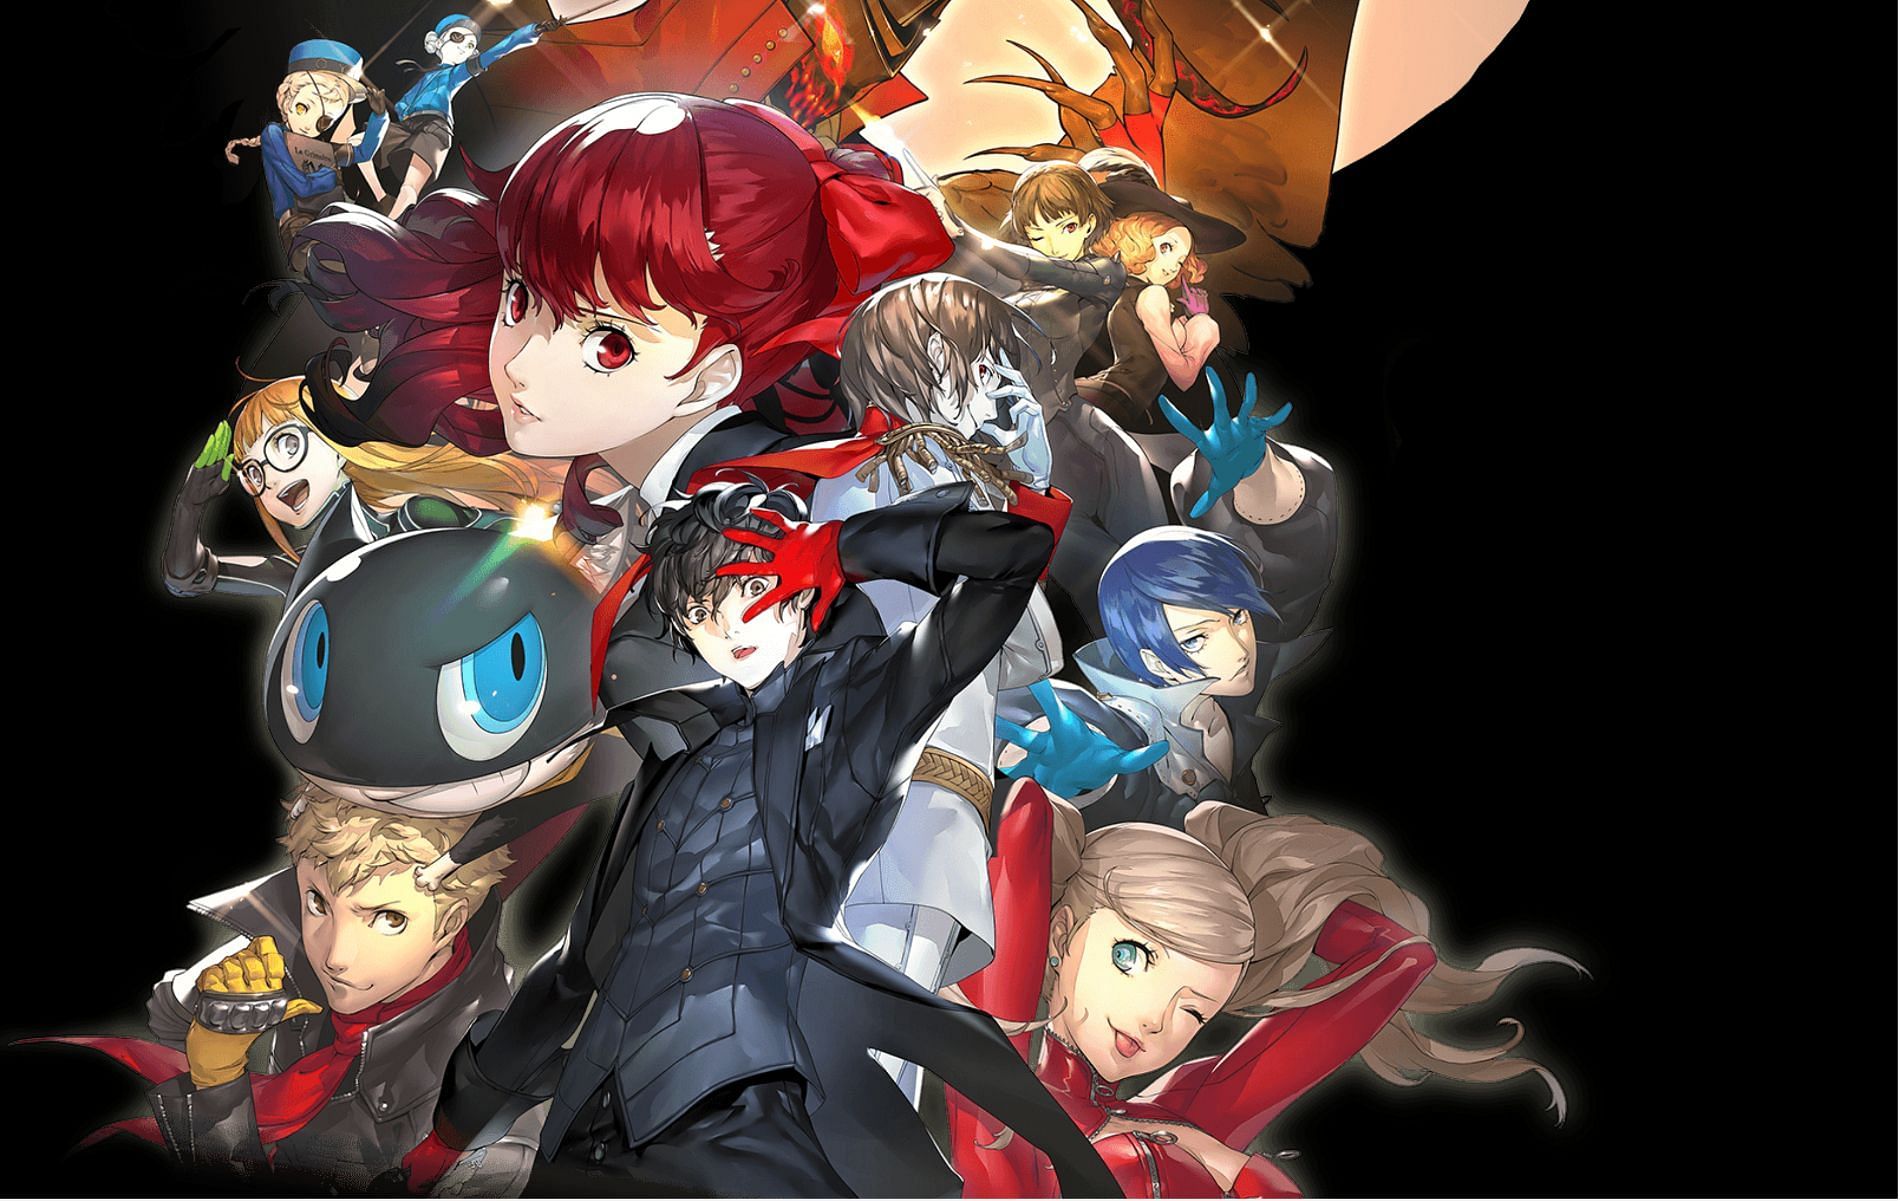 Persona 5 Royal for Xbox and PC will feature more than 40 DLCs, according to a recent blog post by developer Atlus (Image via Atlus)